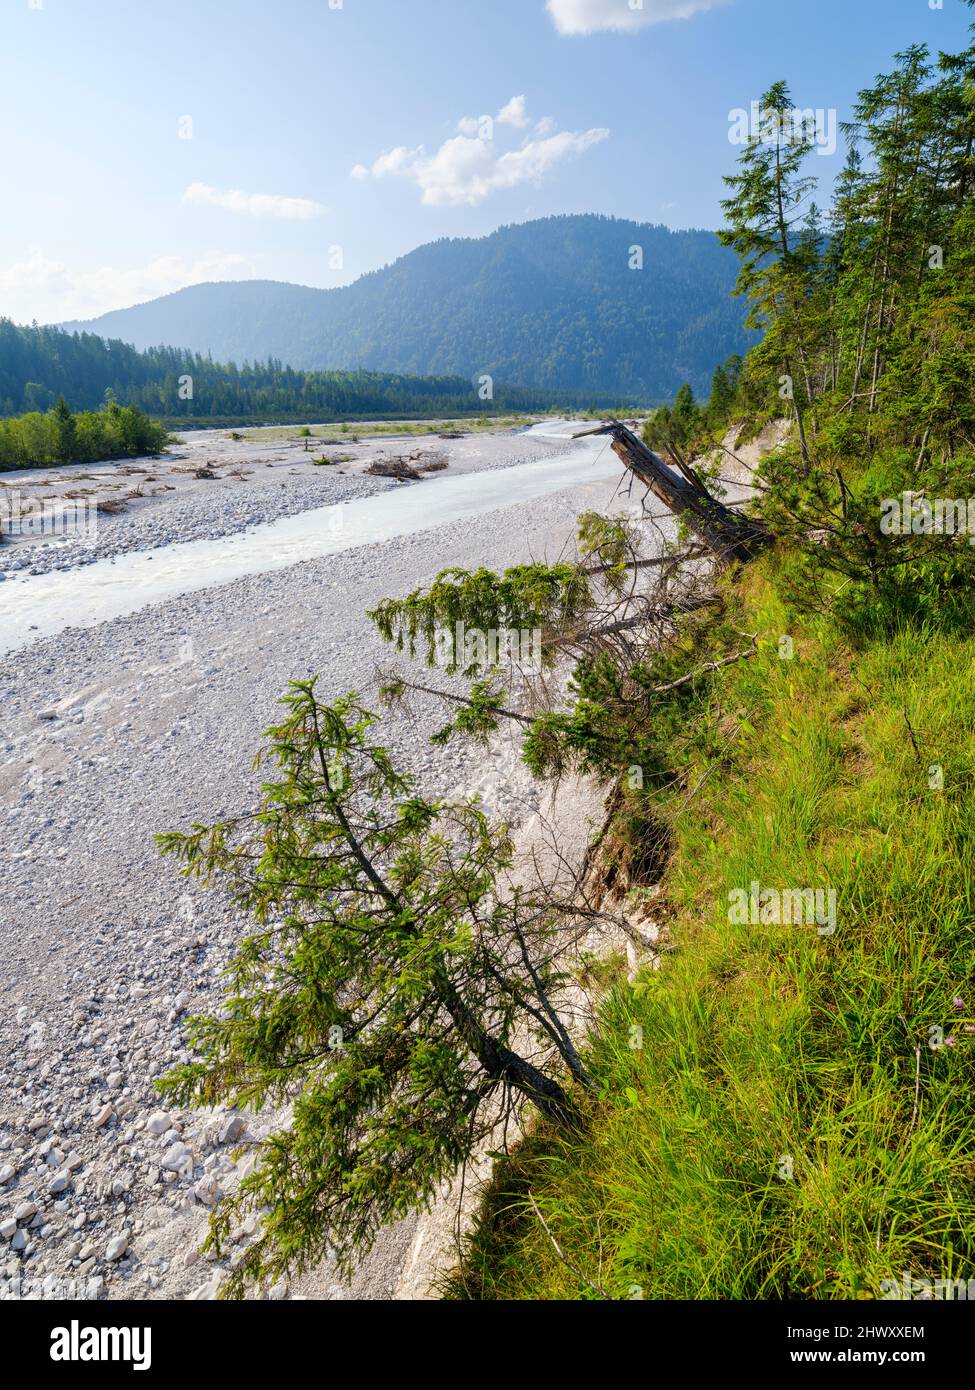 Creek Rissbach, one of the few wild braided rivers in Germany, near village Vorderriss in the Karwendel Mountains. Europe, Germany, Bavaria Stock Photo